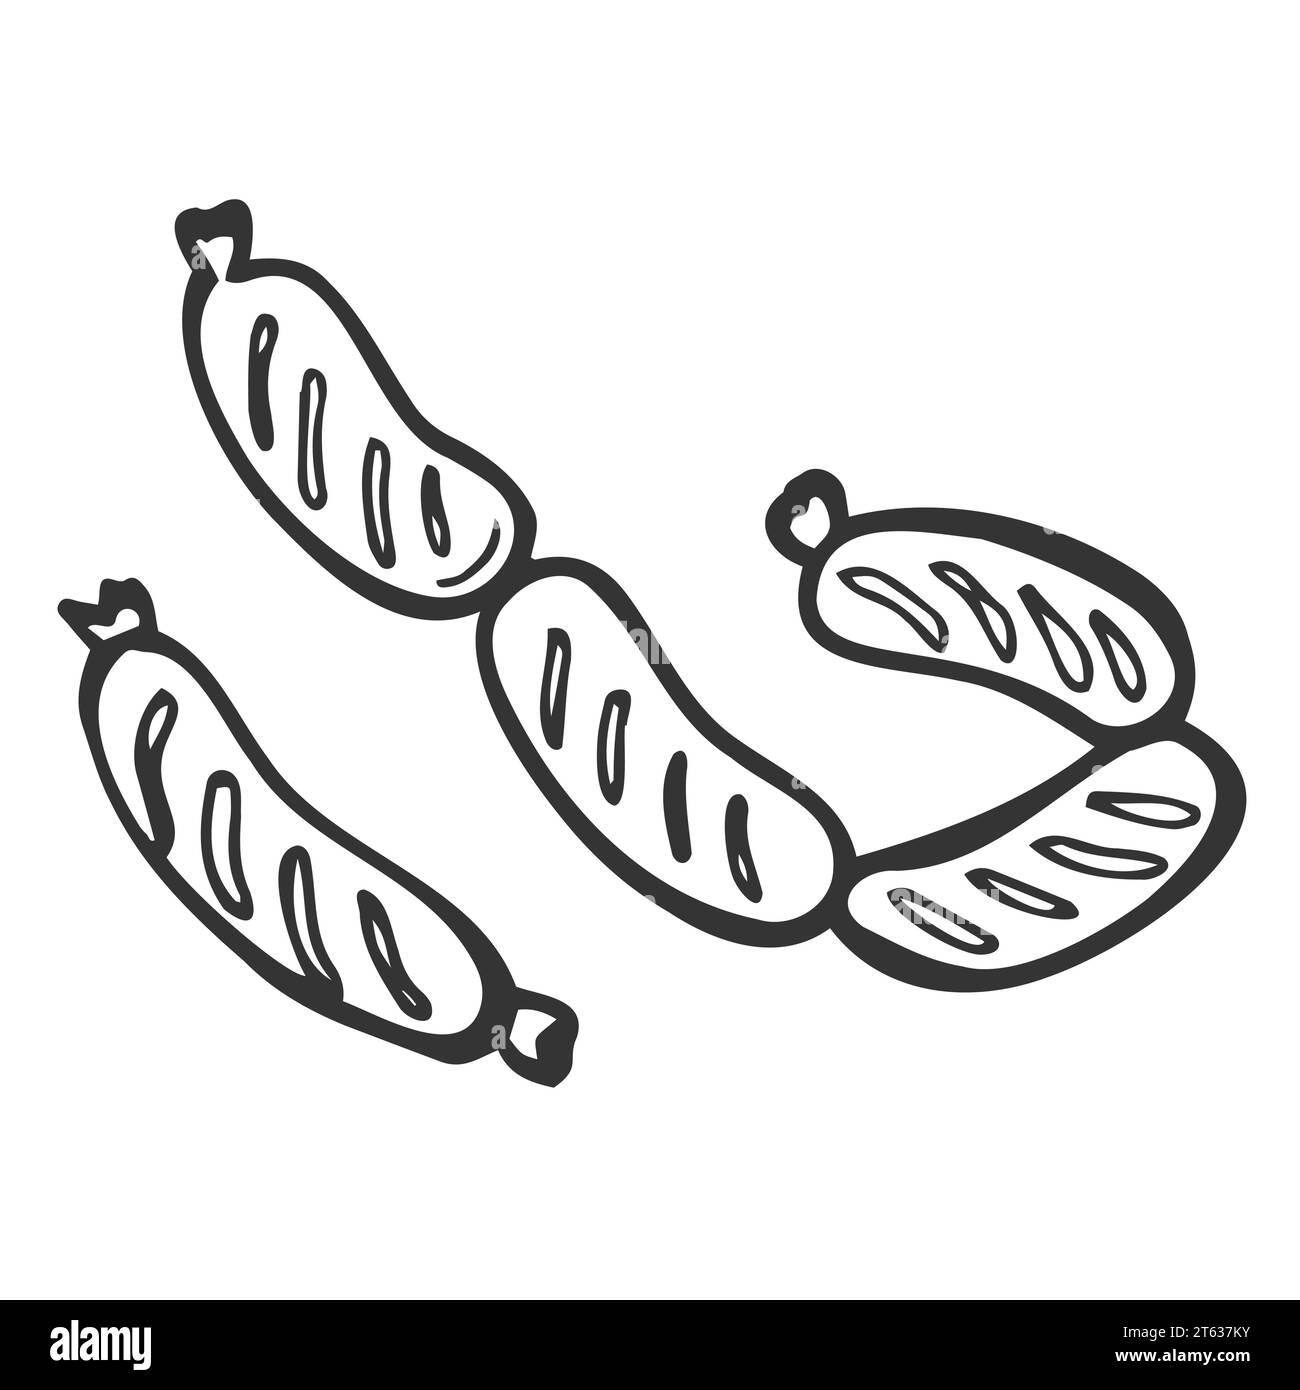 Grilled sausage hand drawn outline doodle icon. Vector sketch illustration of sausage Stock Vector